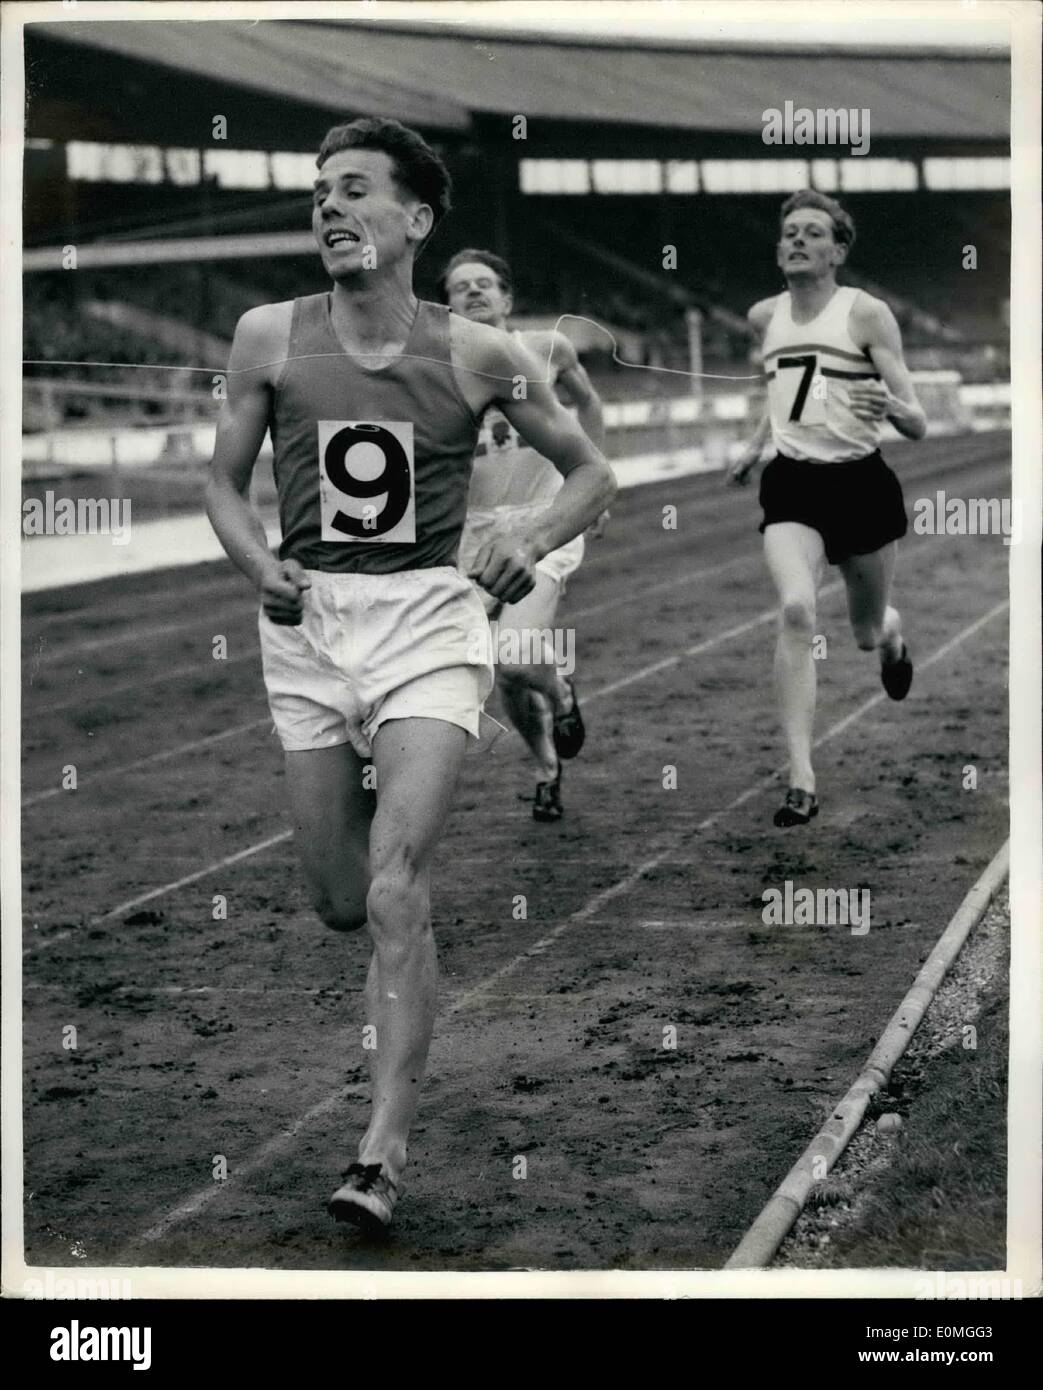 May 05, 1955 - Key Stone Press Agency British Game at White City. First Three Run The Mile in Under Four Minutes. The One Mile International Race at the British Games, White City this afternoon, was won by I. Tabori (Hungary), with a time of 3 min, 59 seconds, C.J. Chataway (Britain), who was second, and B.R. Newson (Britain), was third - also clocked under four minutes. Key Stone Photo Shows: The finish of the One Mile International, at the White City - showing I. Tabori winning from Chataway and Newson. Stock Photo